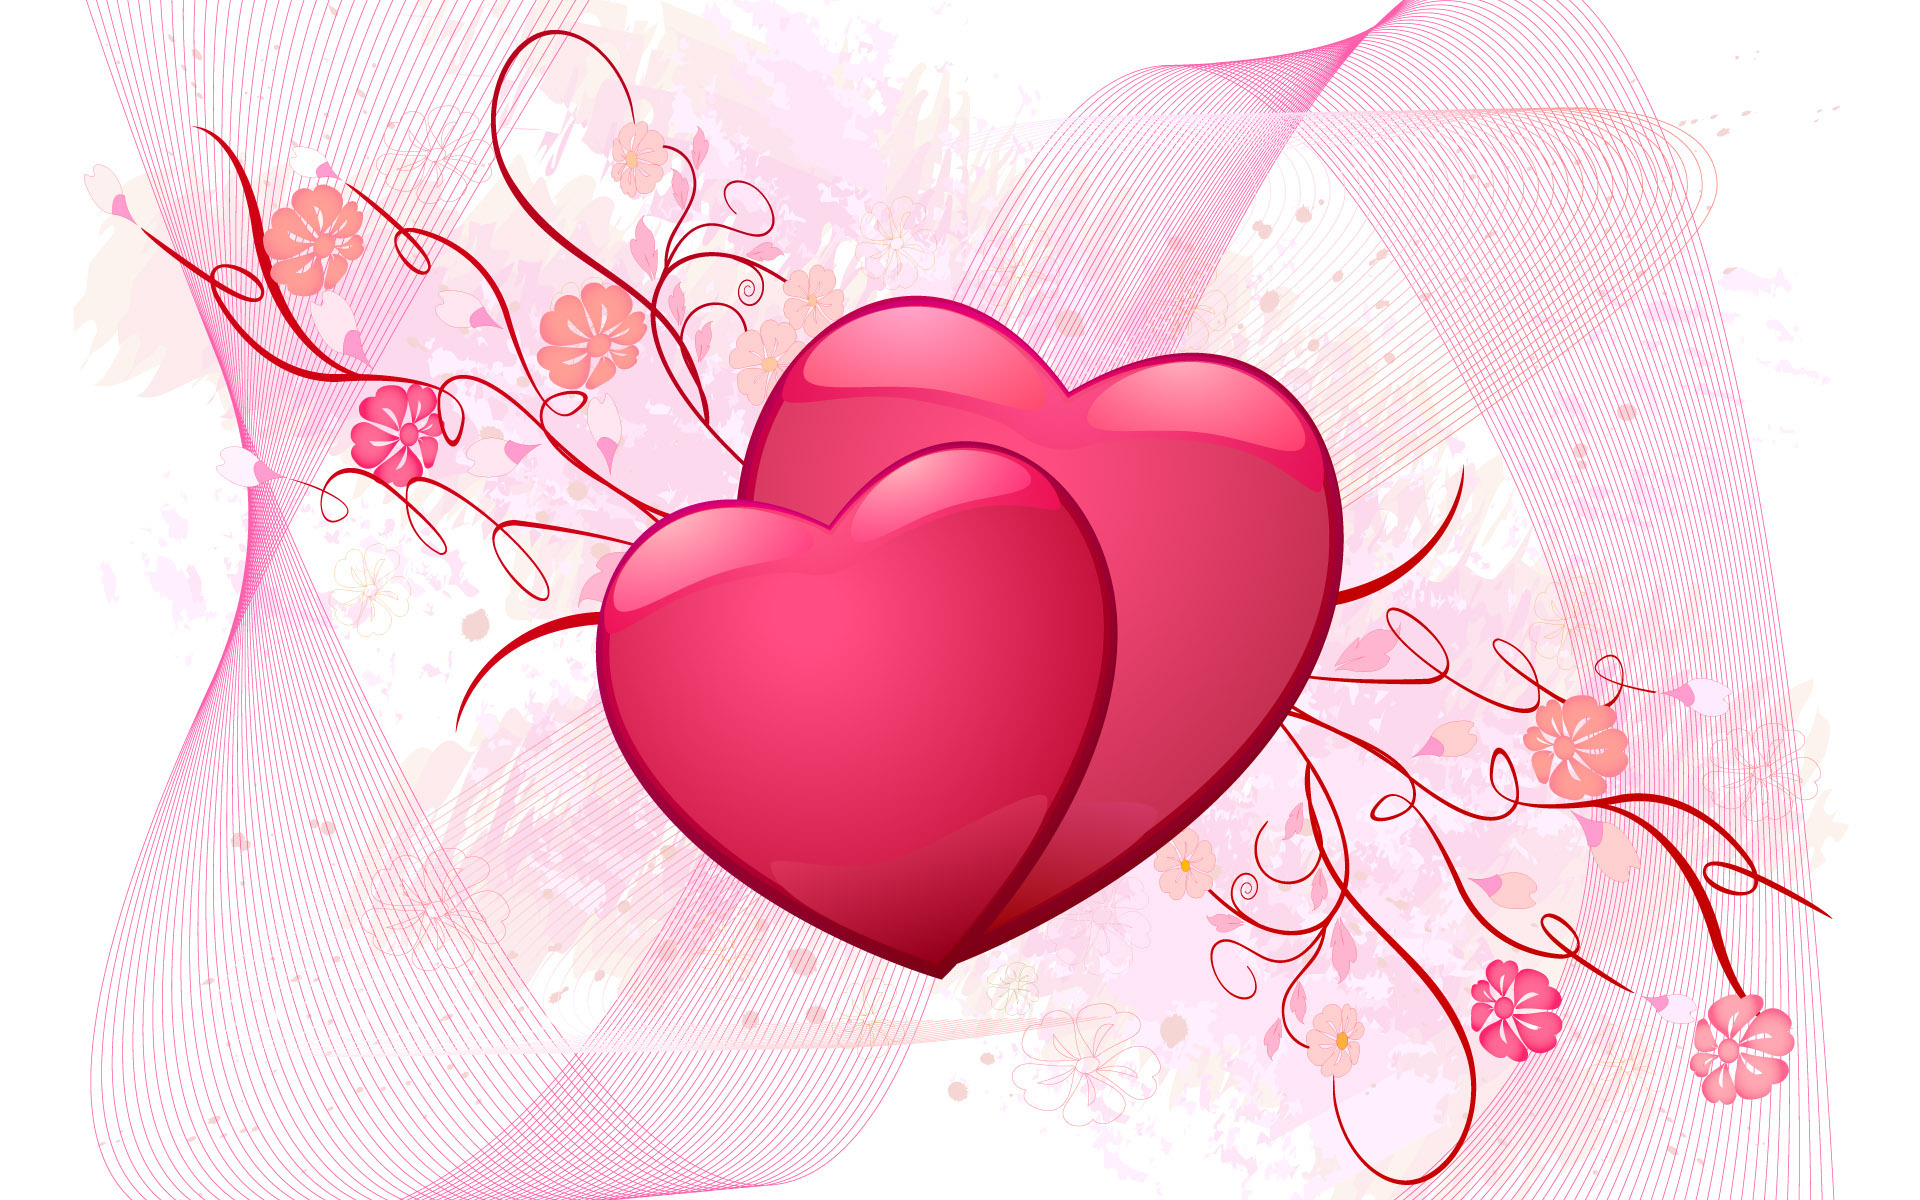 Love heart valentine day backgrounds